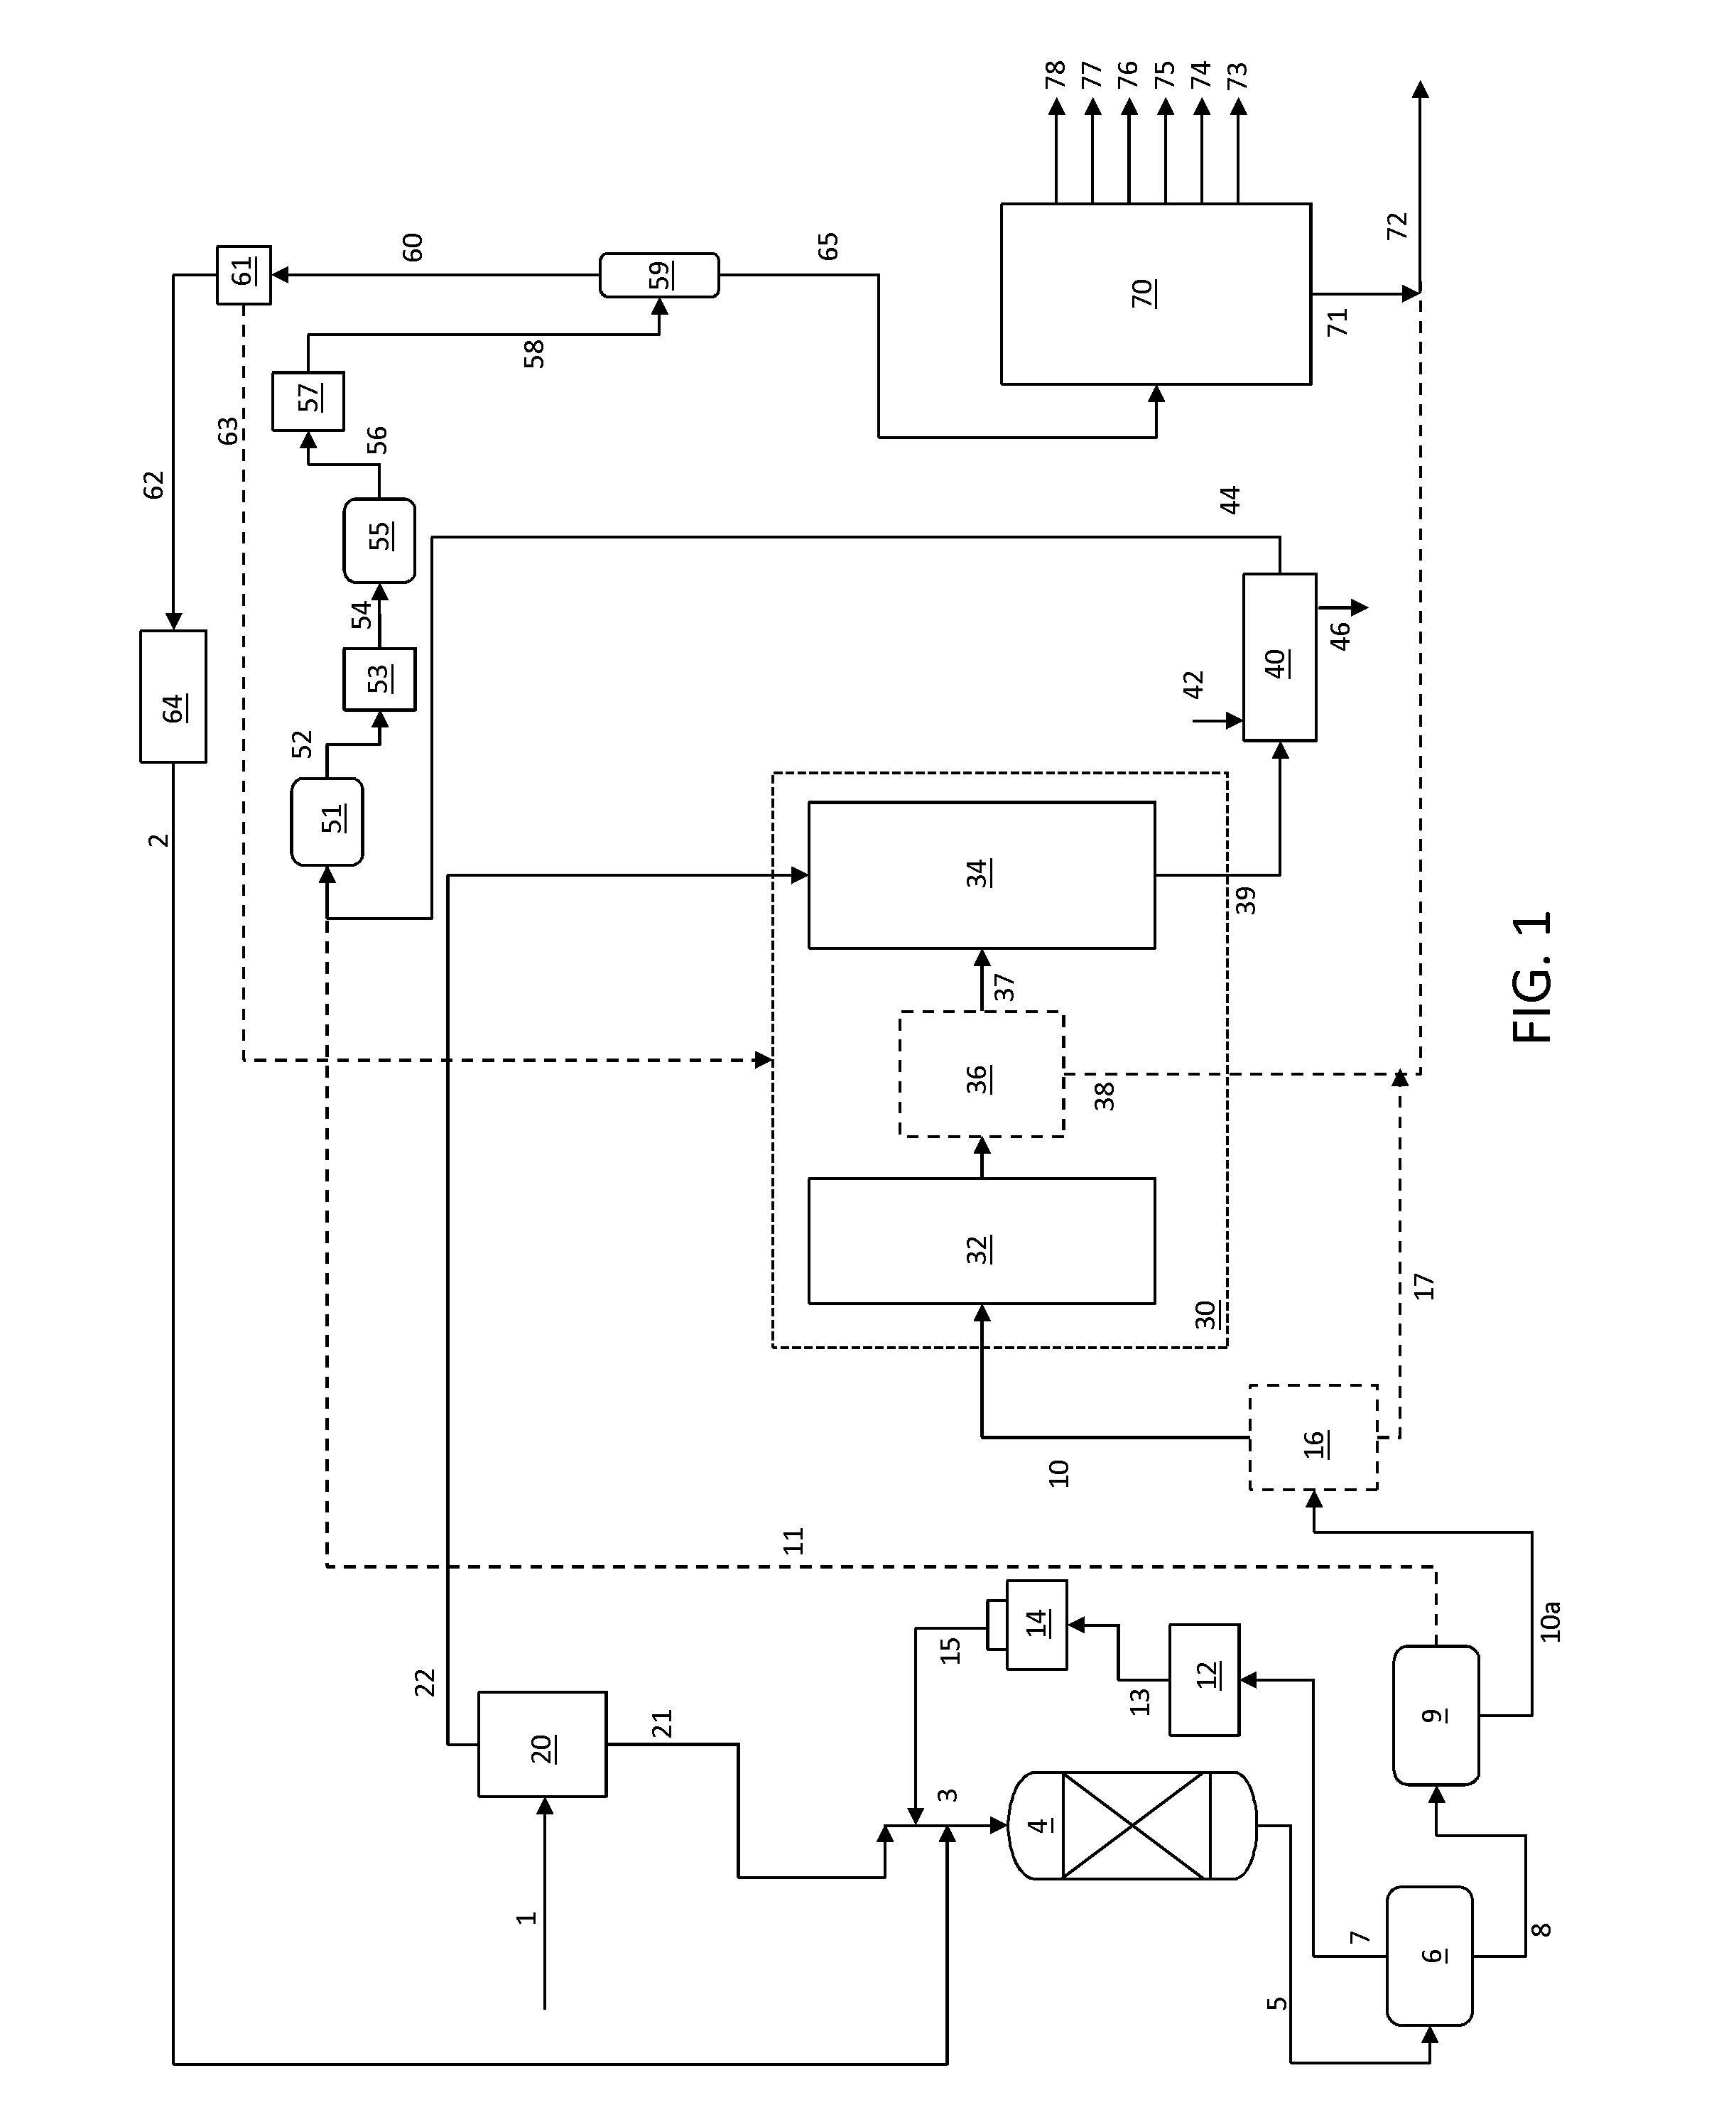 Integrated hydrotreating and steam pyrolysis process including hydrogen redistribution for direct processing of a crude oil